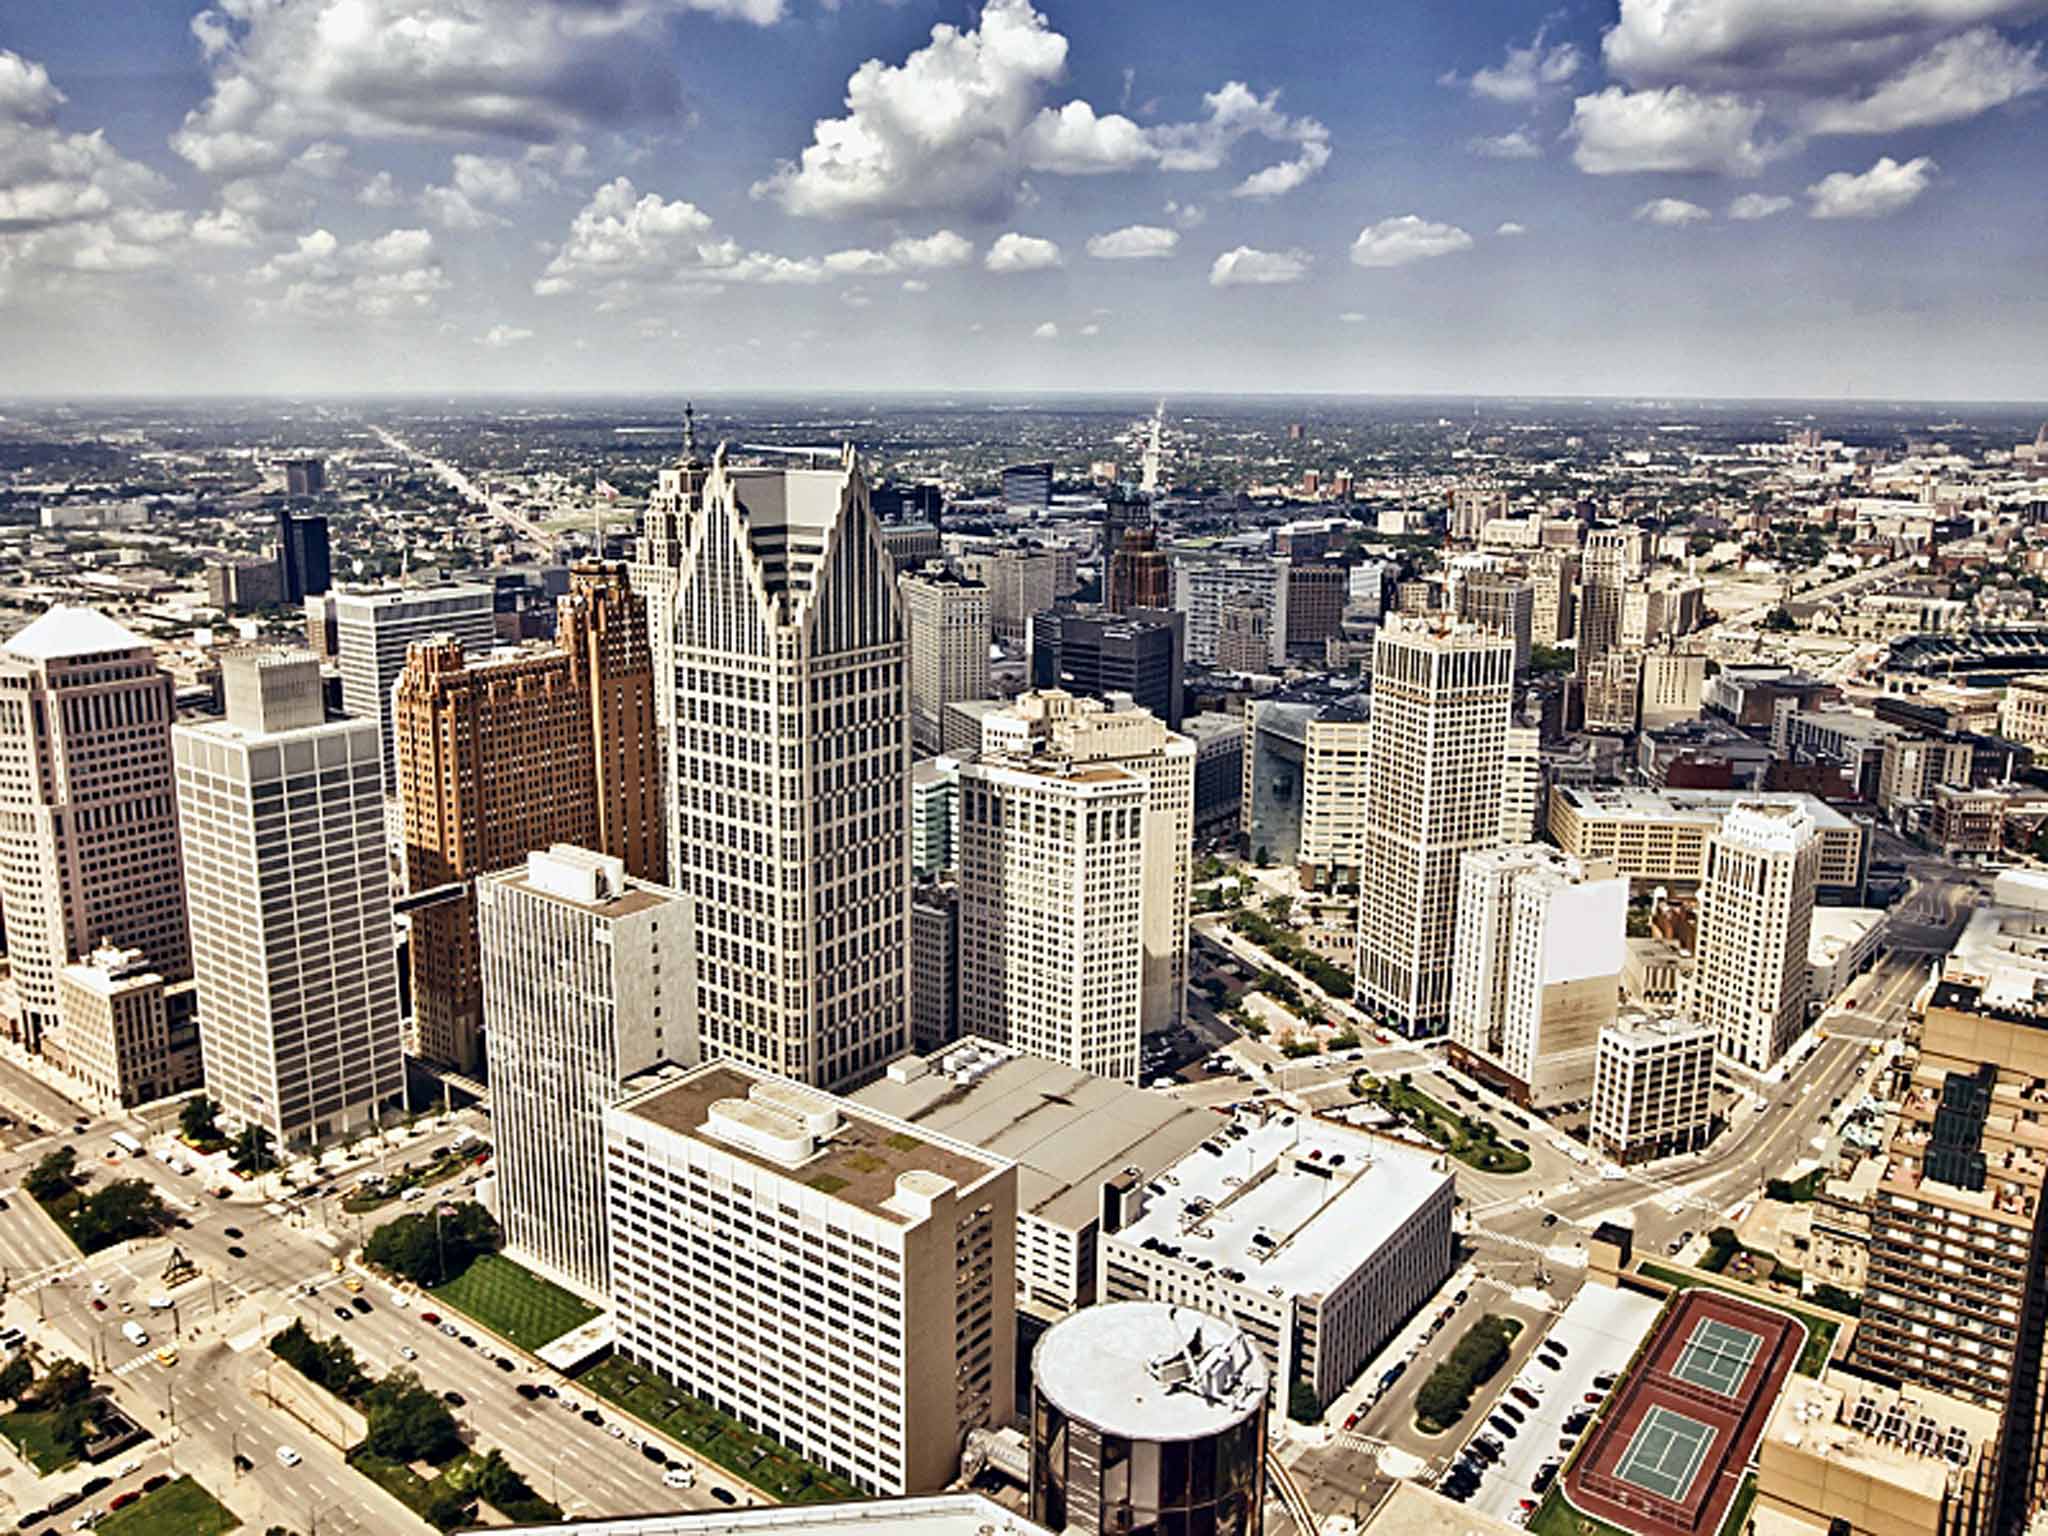 On the up: Detroit is in the early stages of a renaissance